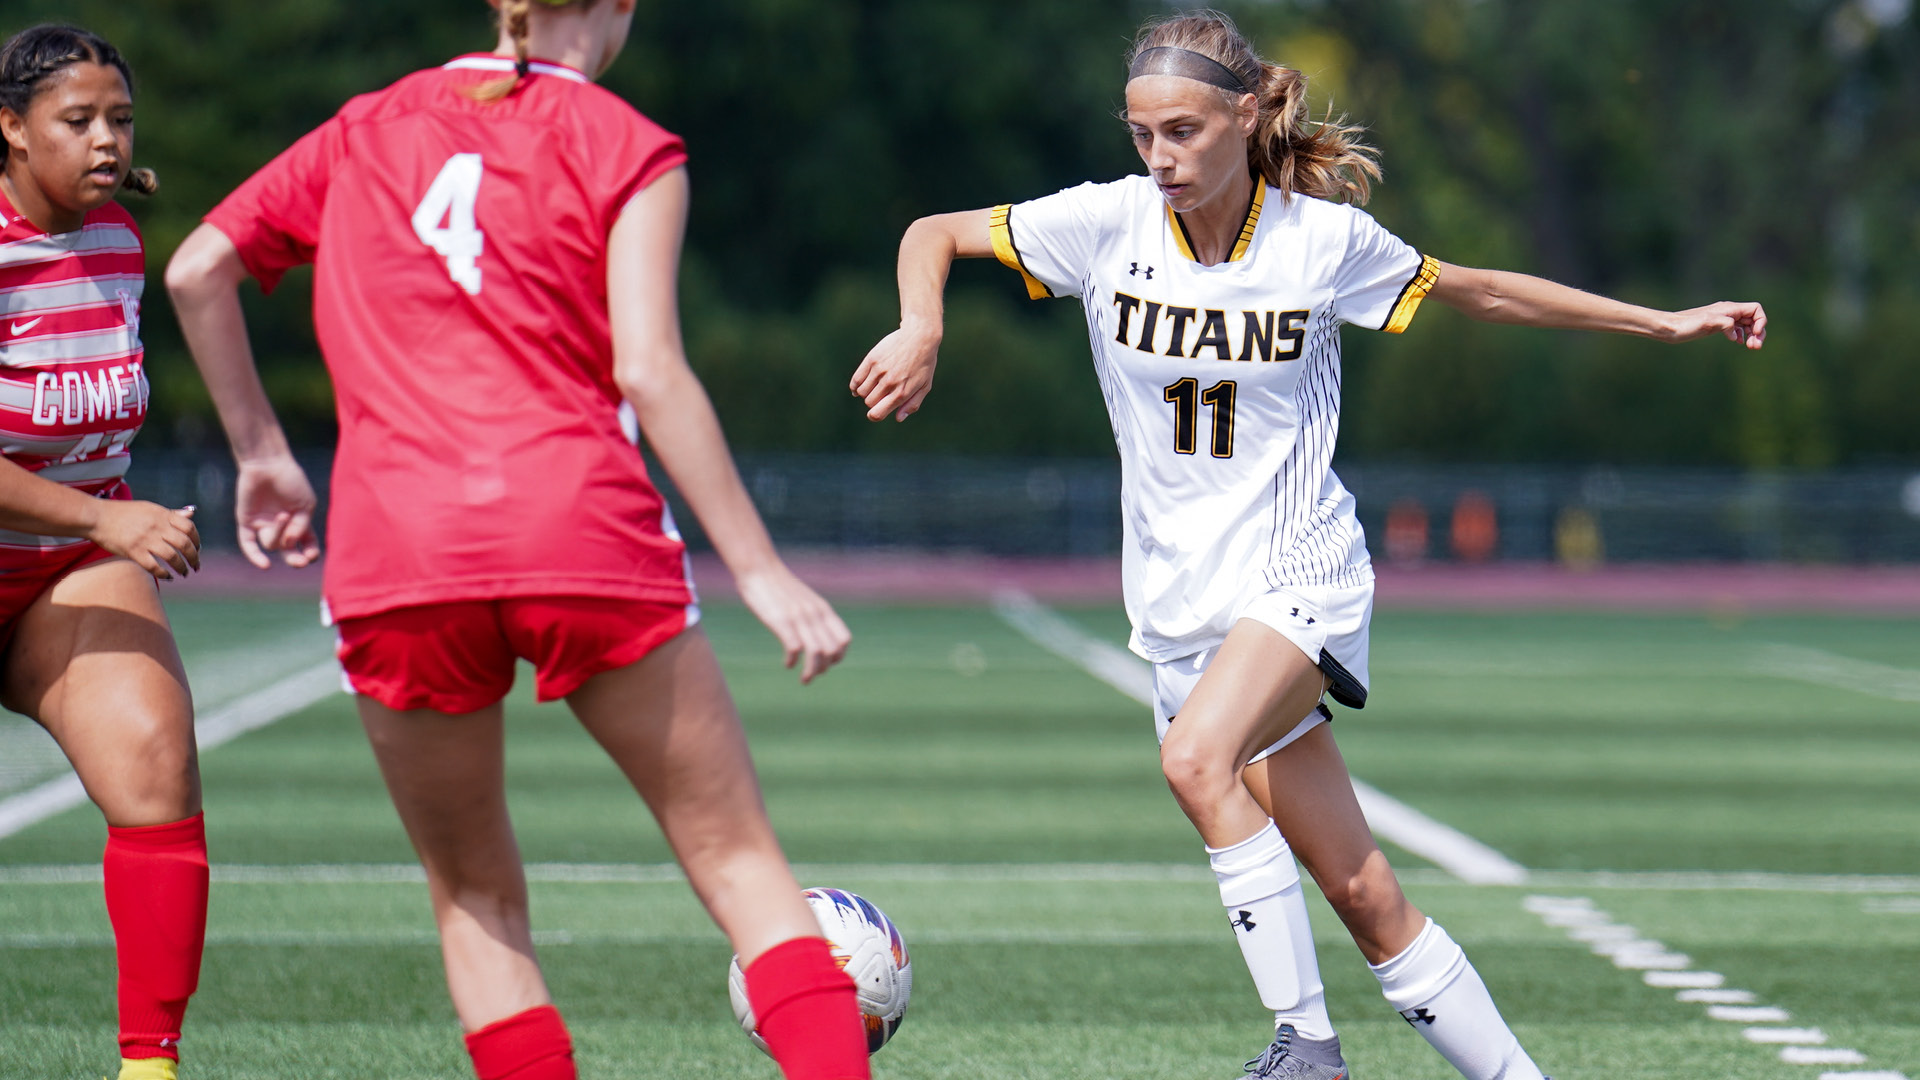 Molly Jackson scored the Titans' goal in the 73rd minute